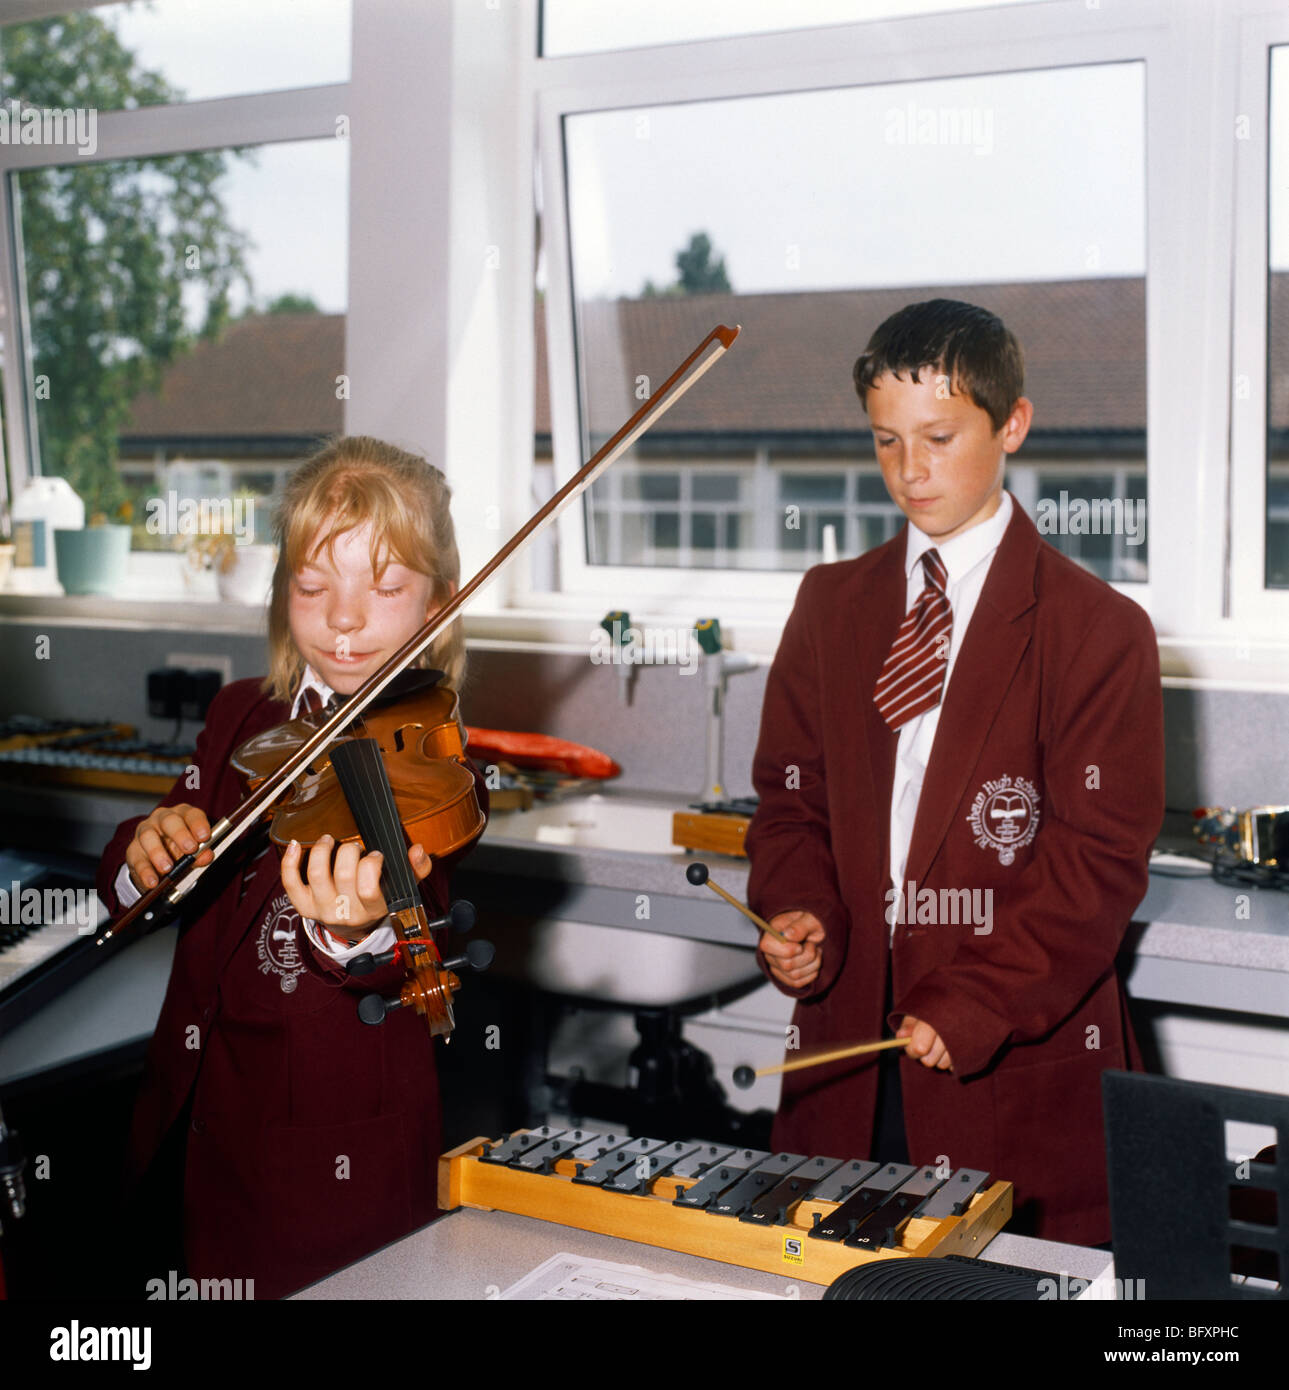 High School Music Class Students Playing Violin And Xylophone Stock Photo